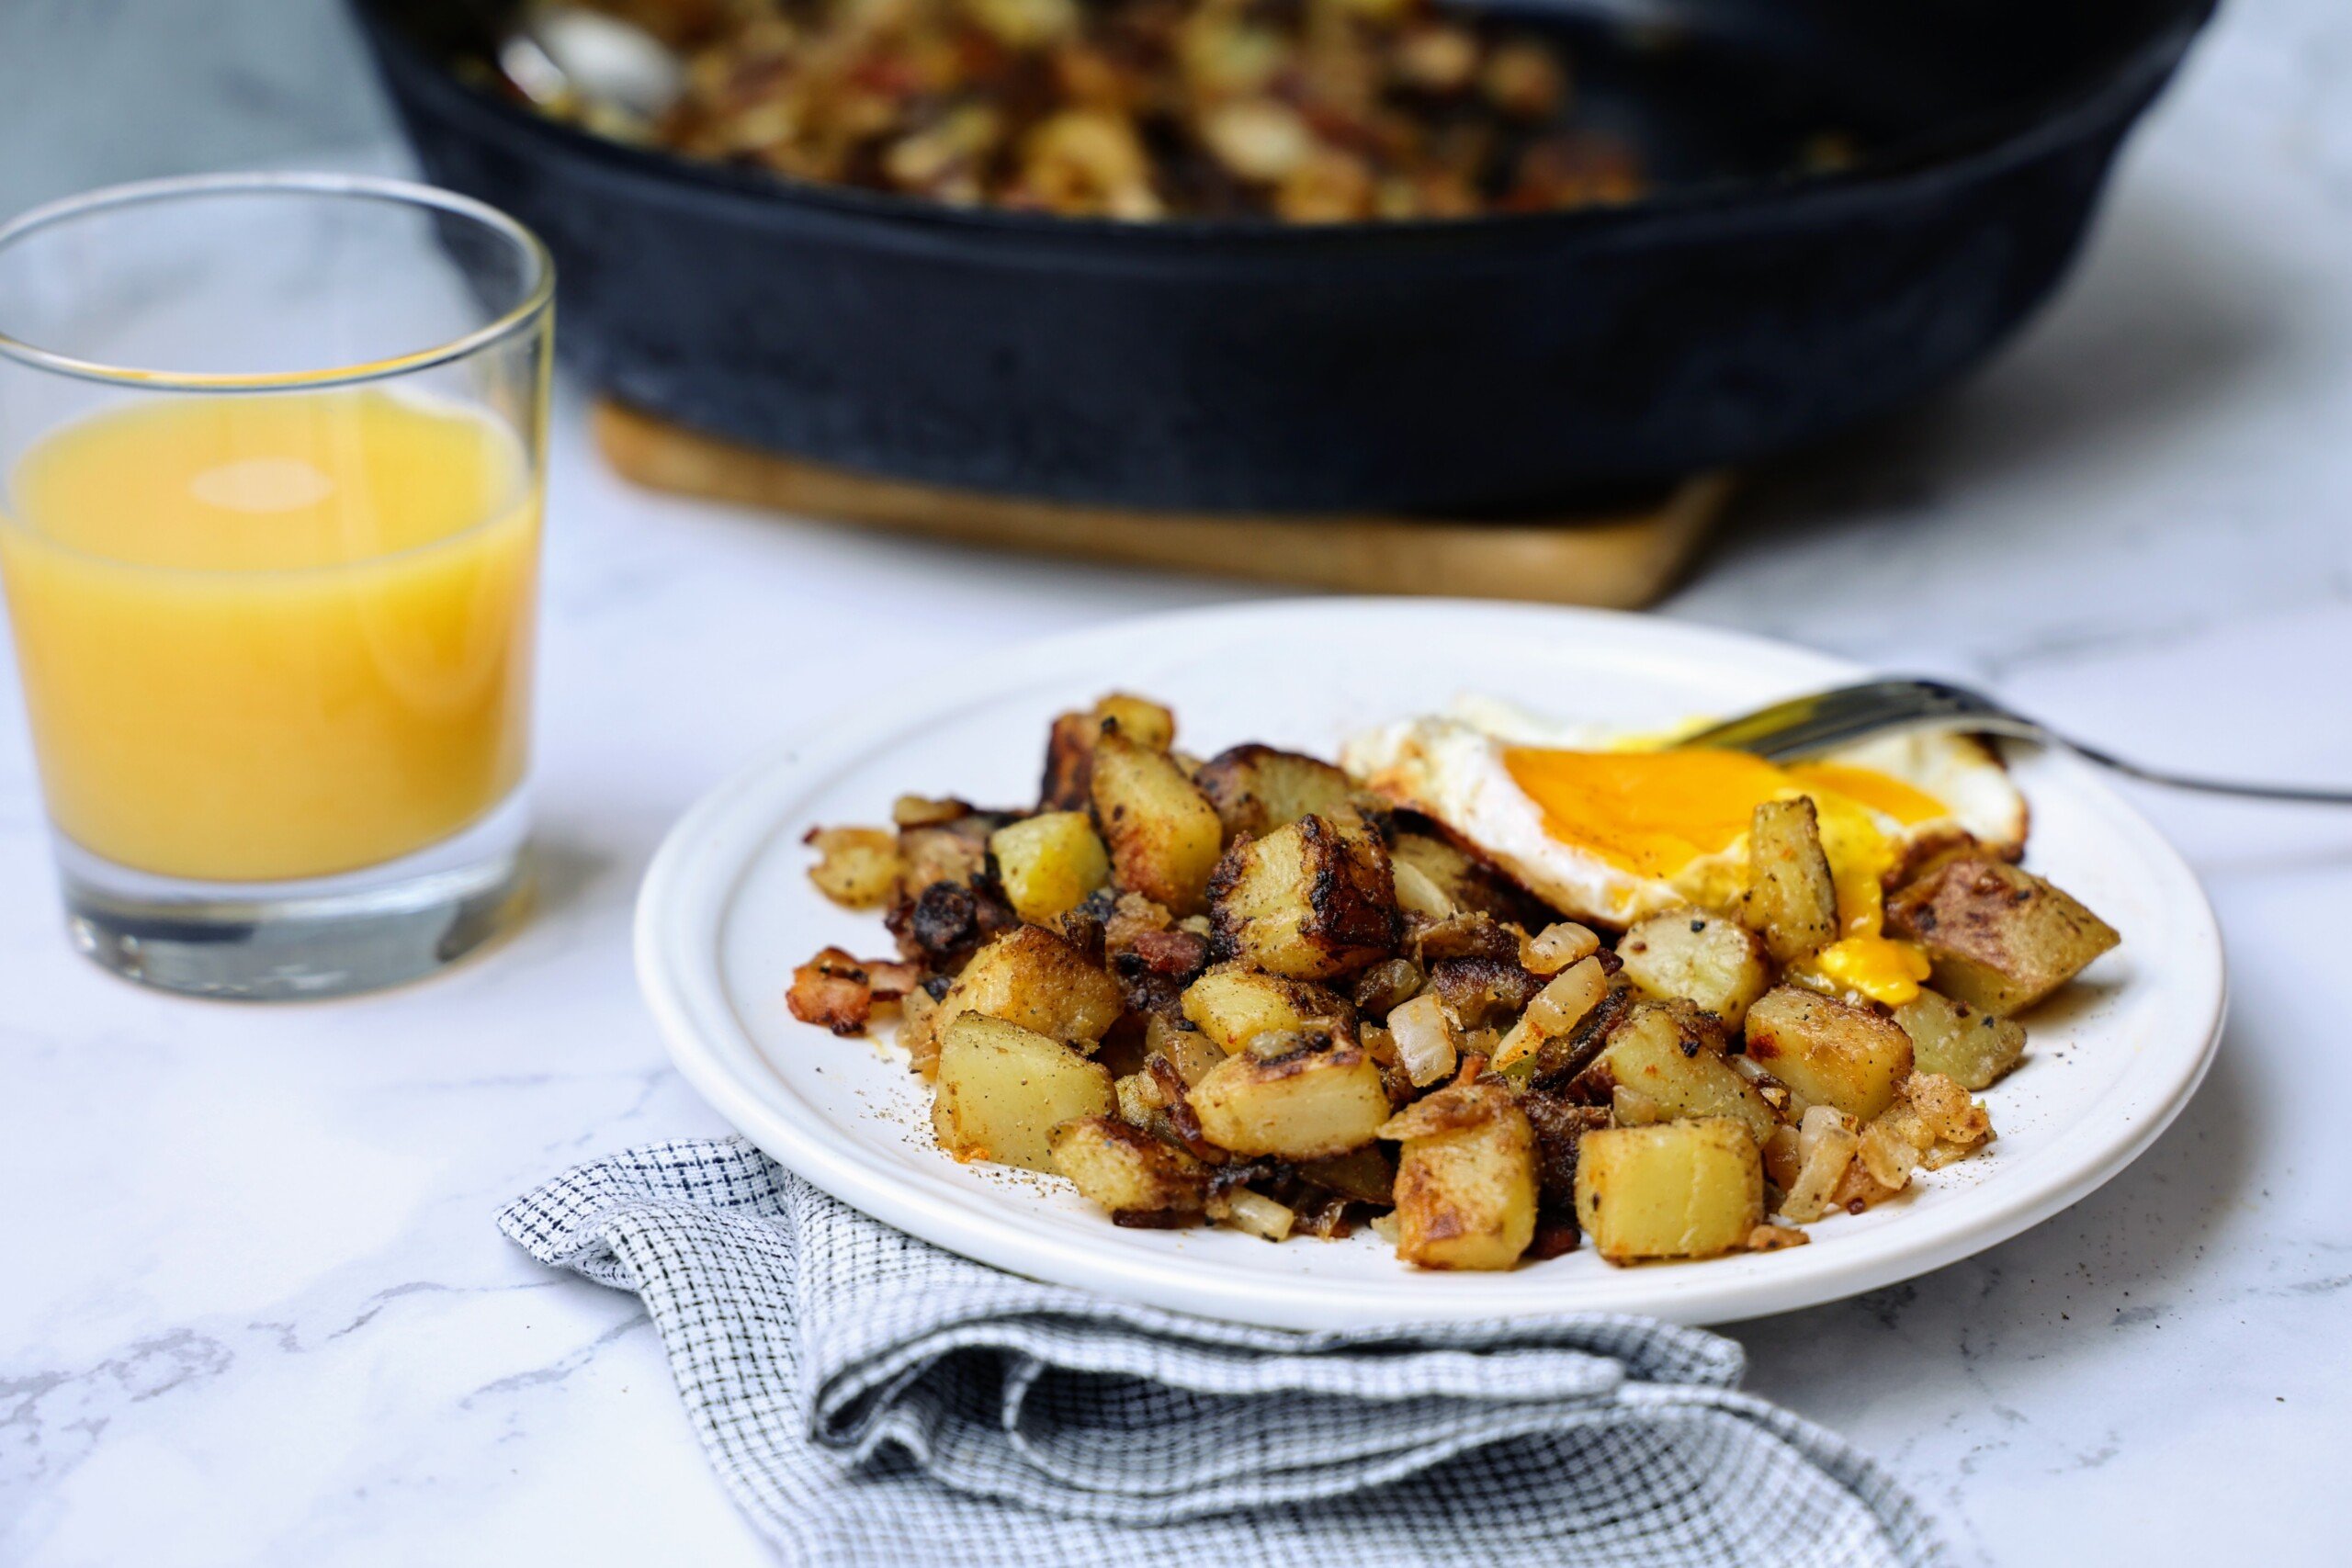 Skillet breakfast potatoes (home fries) on plate with over-easy egg on top.